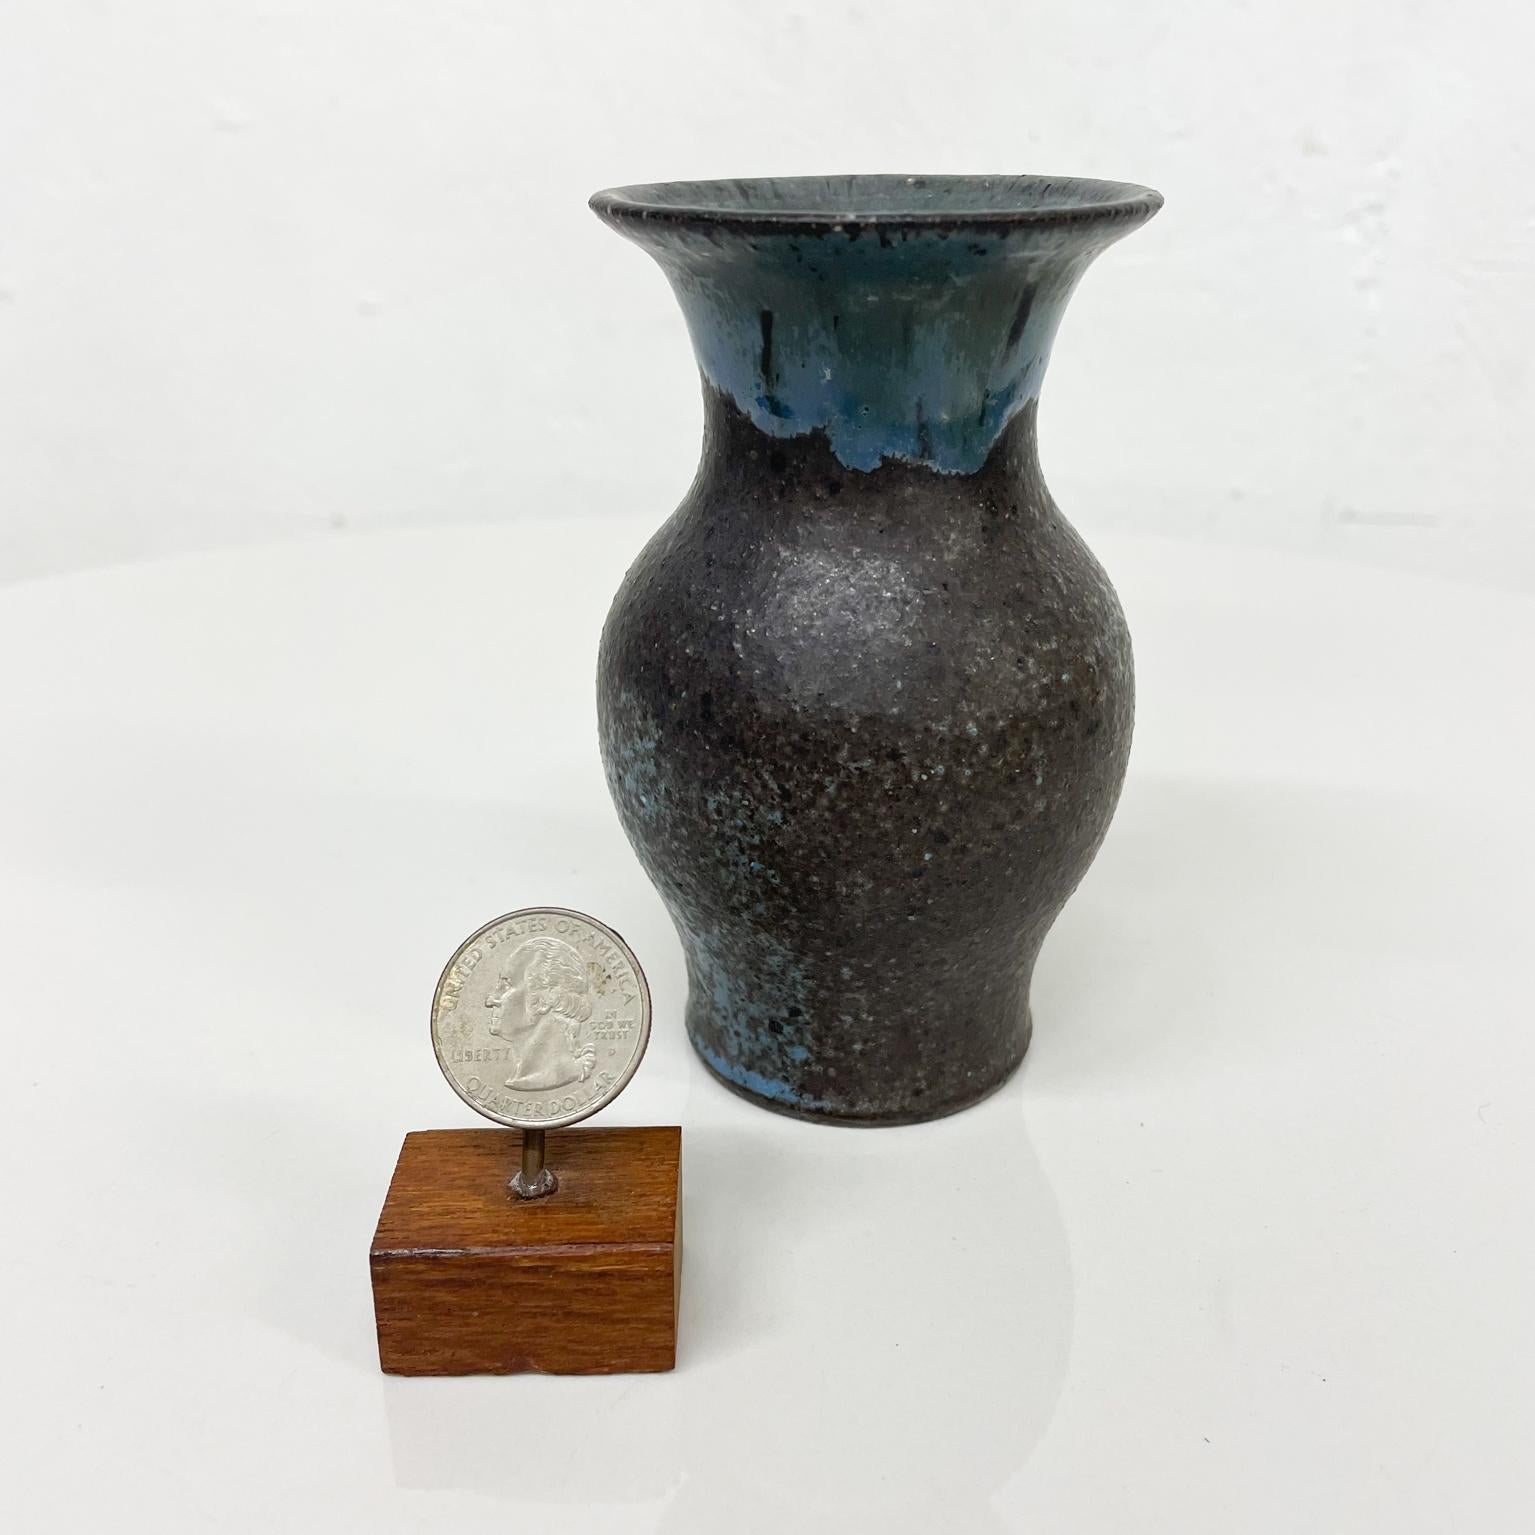 Vase
Midcentury Modern very tiny Weed Pot Bud Vase draped in blue glaze with black tones.
Signed with S
2.63 diameter x 4.63 tall inches
Preowned unrestored Vintage Condition Piece
See images please.
 